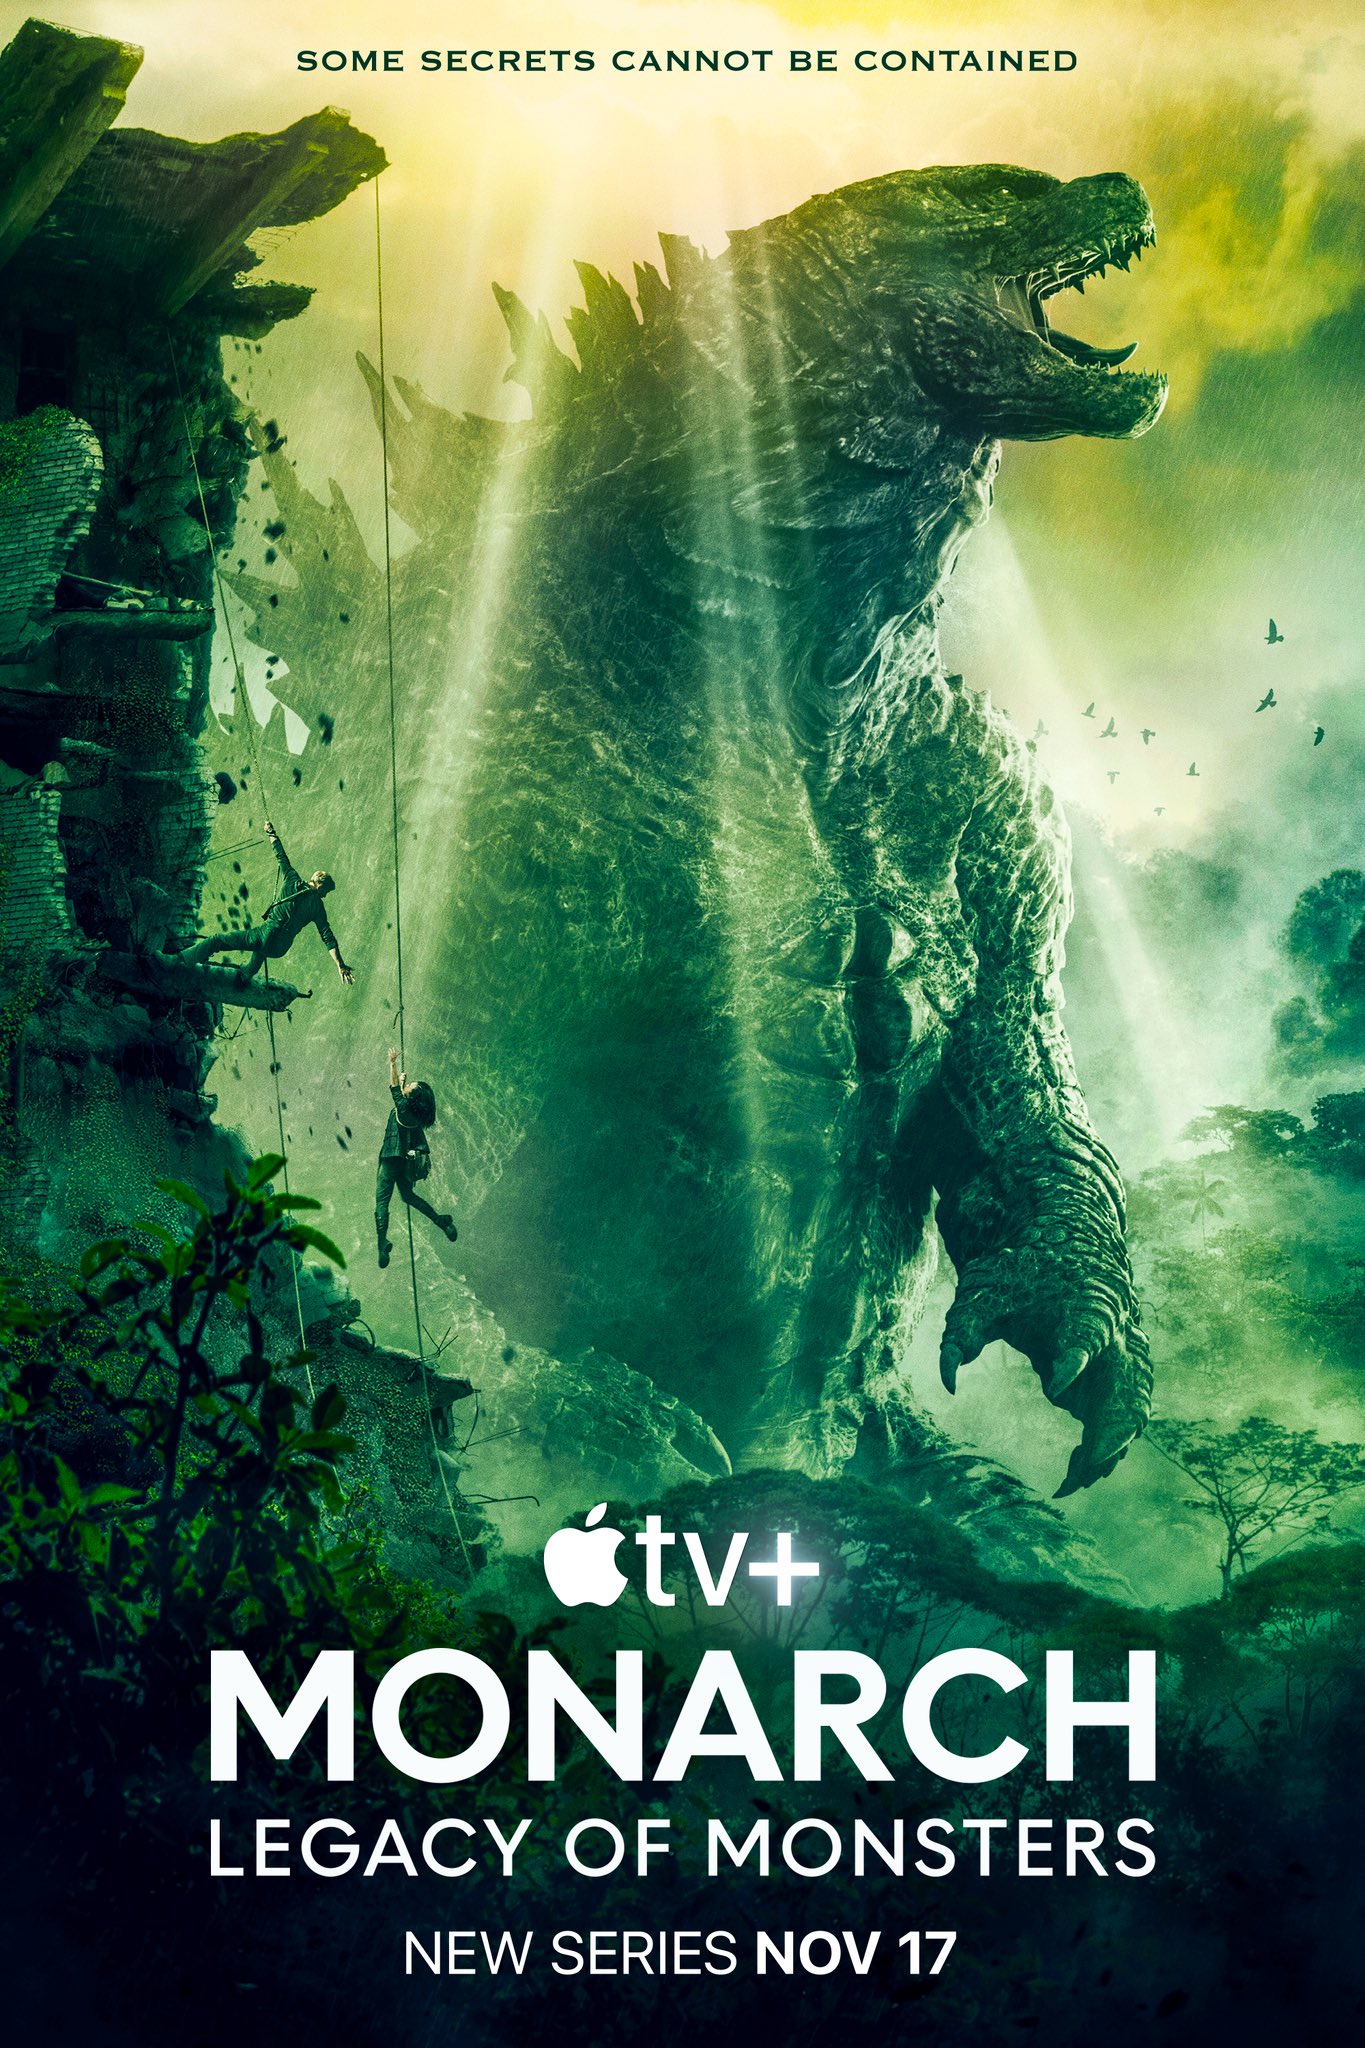 Monarch: Legacy of Monsters (2023)